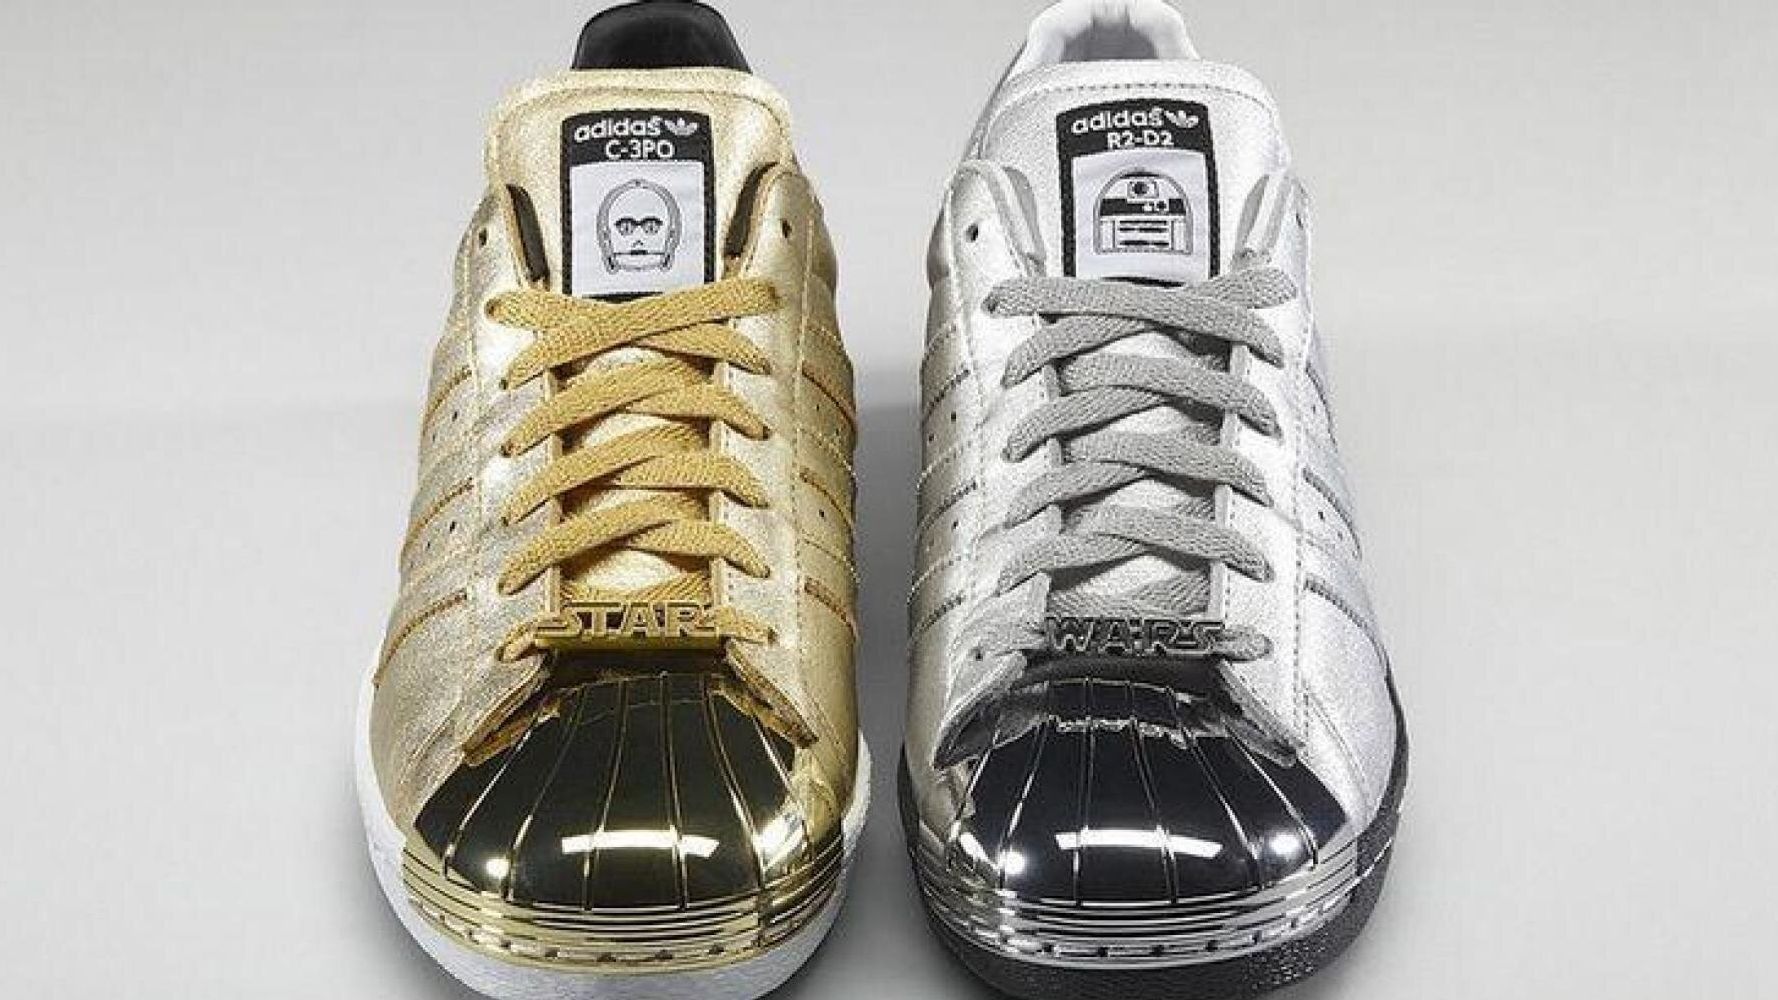 Adidas Star Wars Trainers 2015: C-3PO and R2-D2 Shoes Have Just